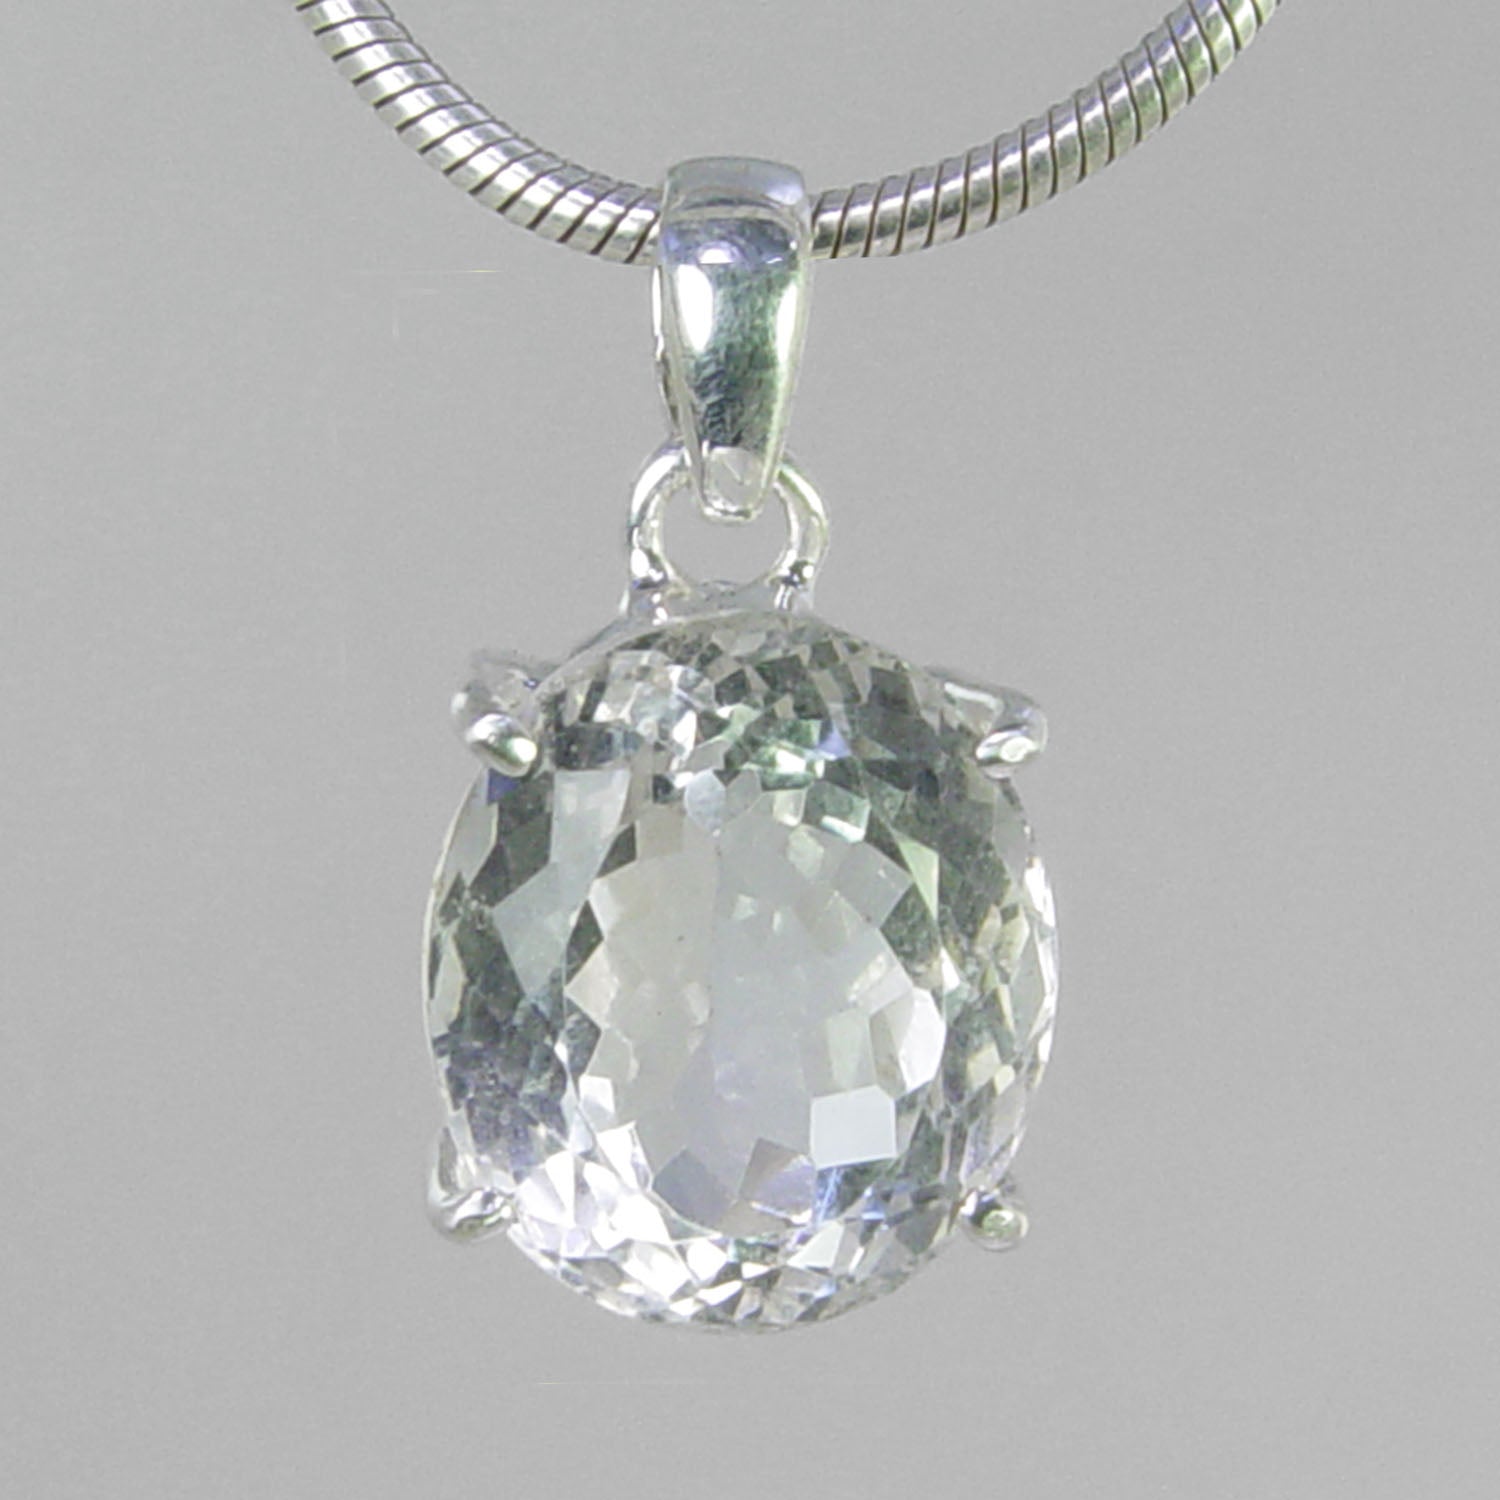 Crystal Quartz  15.9 ct Faceted Oval Sterling Silver Pendant